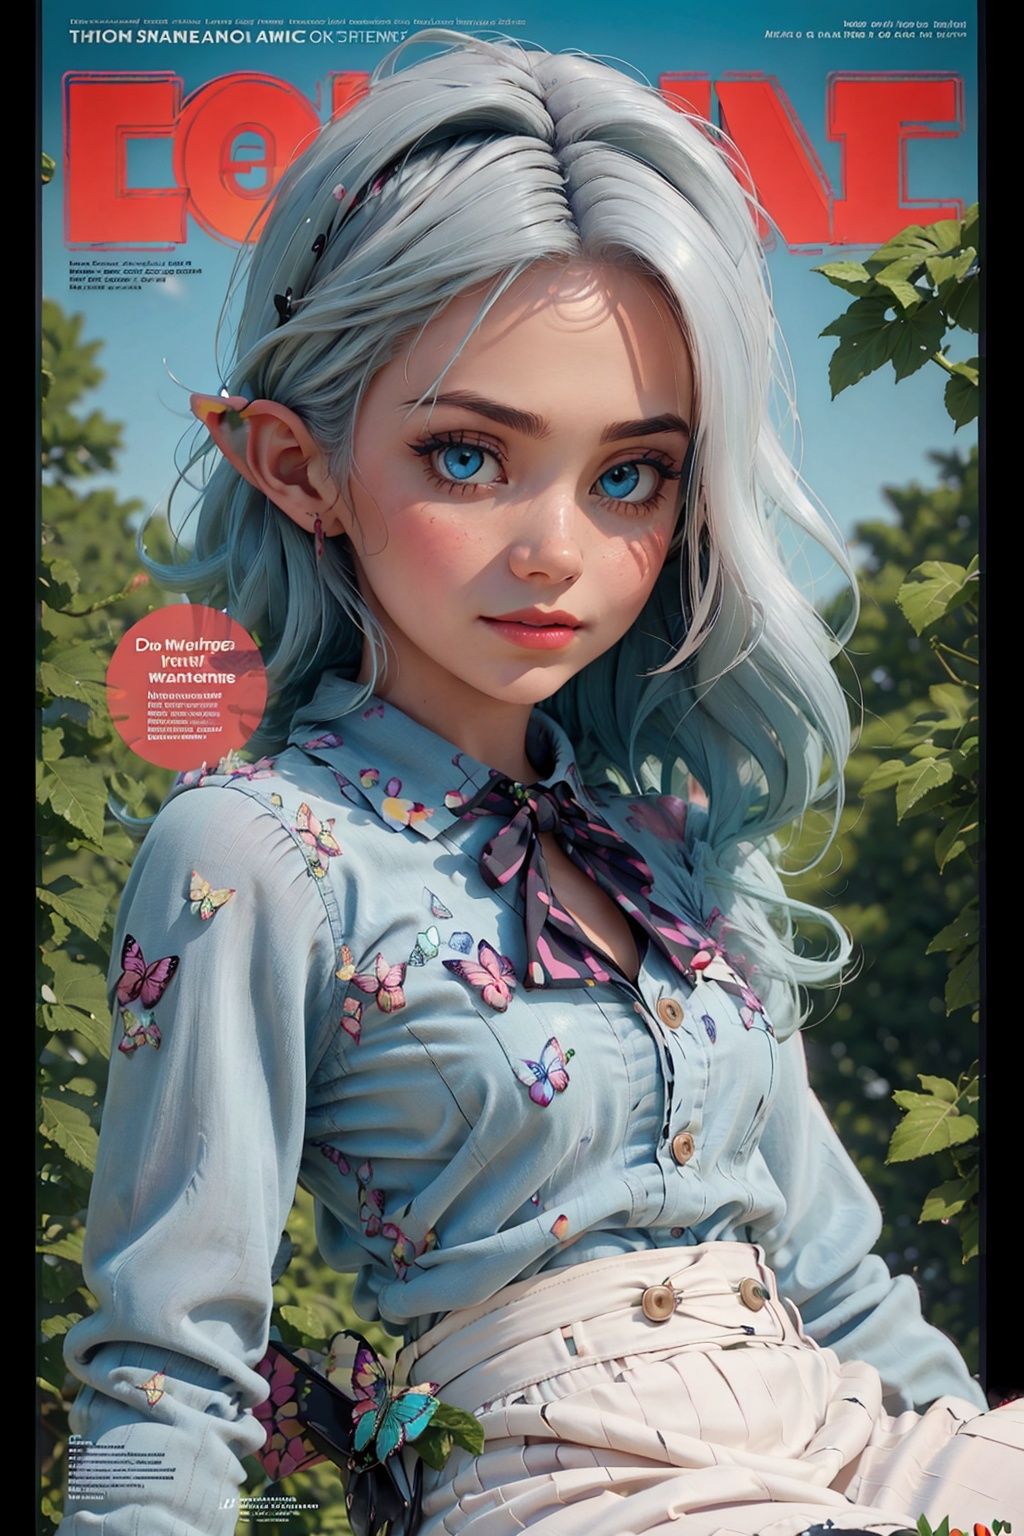 ((masterpiece)), expressionless, (((best quality))), ((illustration)),
1girl, elf, ((solo)), (detailed face), (beautiful detailed eyes), light eyes, blue eyes, ((disheveled hair)), silver hair, full body,
smile, blank stare, sitting, ((looking to the side)),
bow tie hair band, white transparent long skirt, noble, mysterious,
bright background, in forest, nature, sunshines through the leaves, butterfly, river, close-up,
(magazine:1.3), (cover-style:1.3), fashionable, woman, vibrant, outfit, posing, front, colorful, dynamic, background, elements, confident, expression, holding, statement, accessory, majestic, coiled, around, touch, scene, text, cover, bold, attention-grabbing, title, stylish, font, catchy, headline, larger, striking, modern, trendy, focus, fashion,Pixar